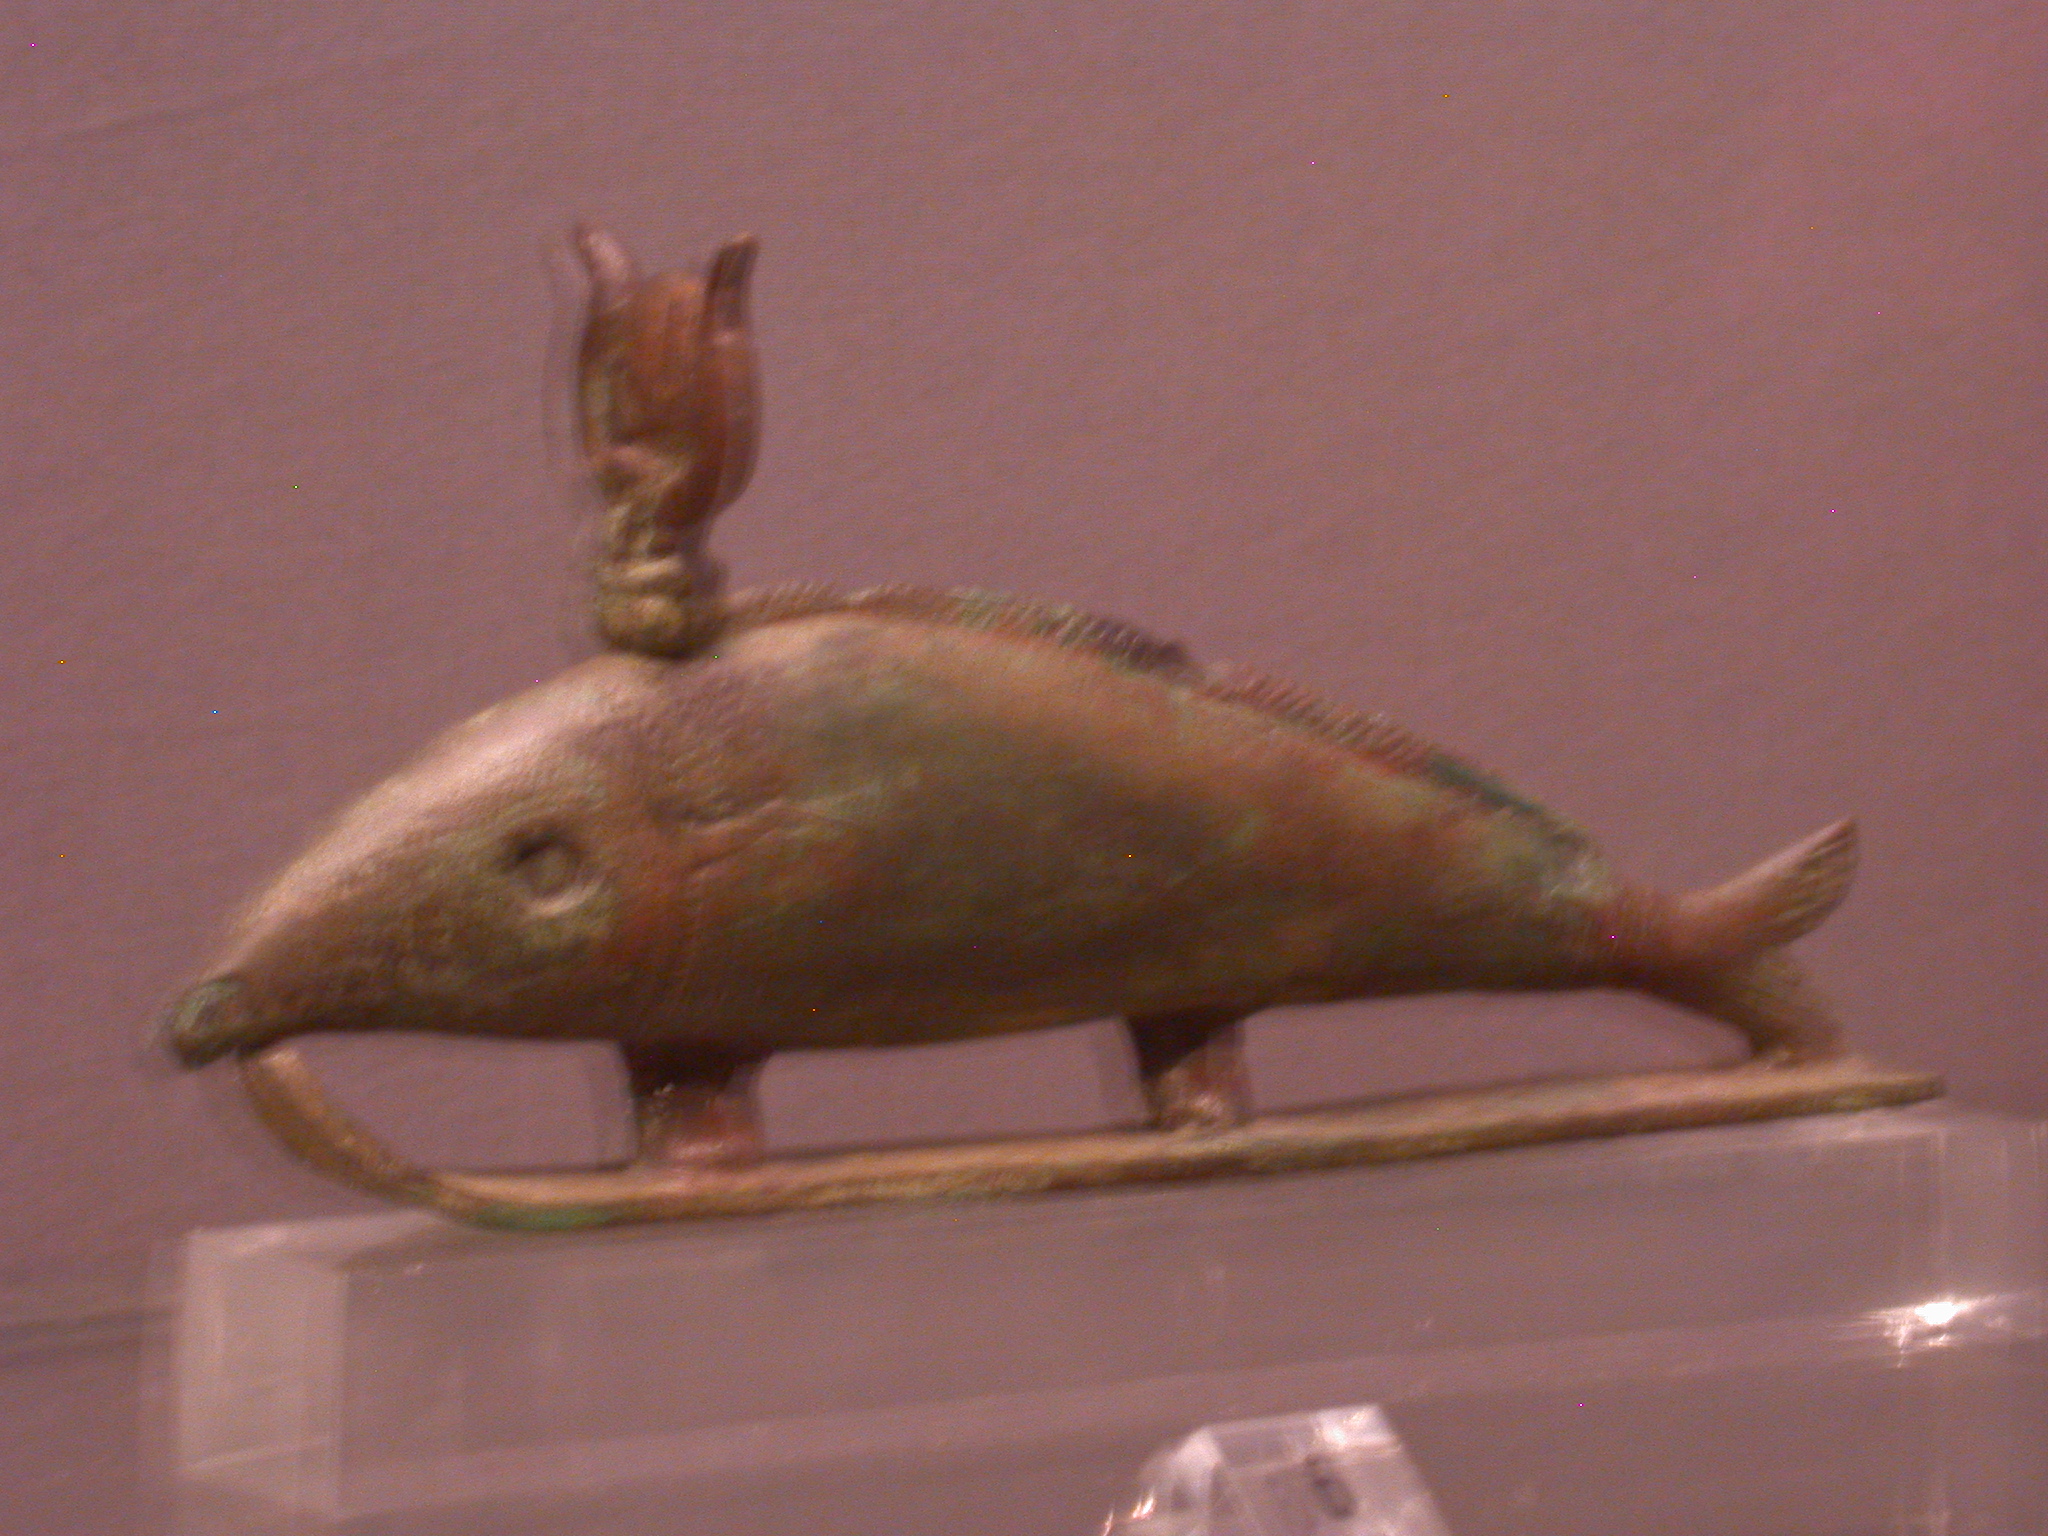 Fish on a Sledge, Probably Part of Coffin for Mummified Fish, Copper Alloy, Late Period, 746-336 BCE, Egypt, Fitzwilliam Museum, Cambridge, England